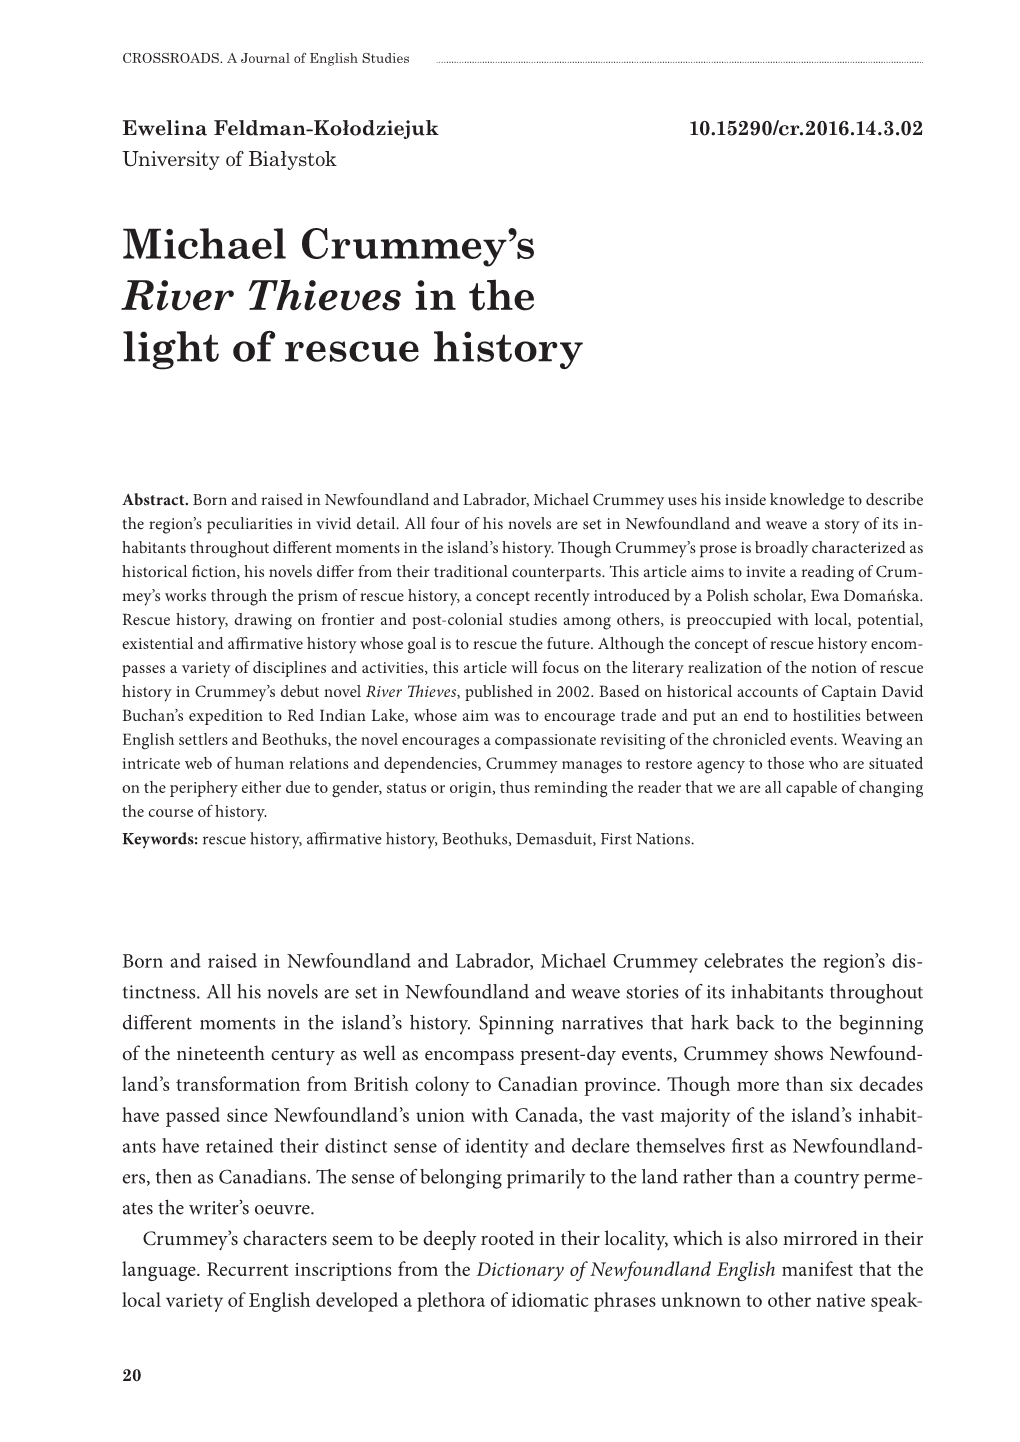 Michael Crummey's River Thieves in the Light of Rescue History